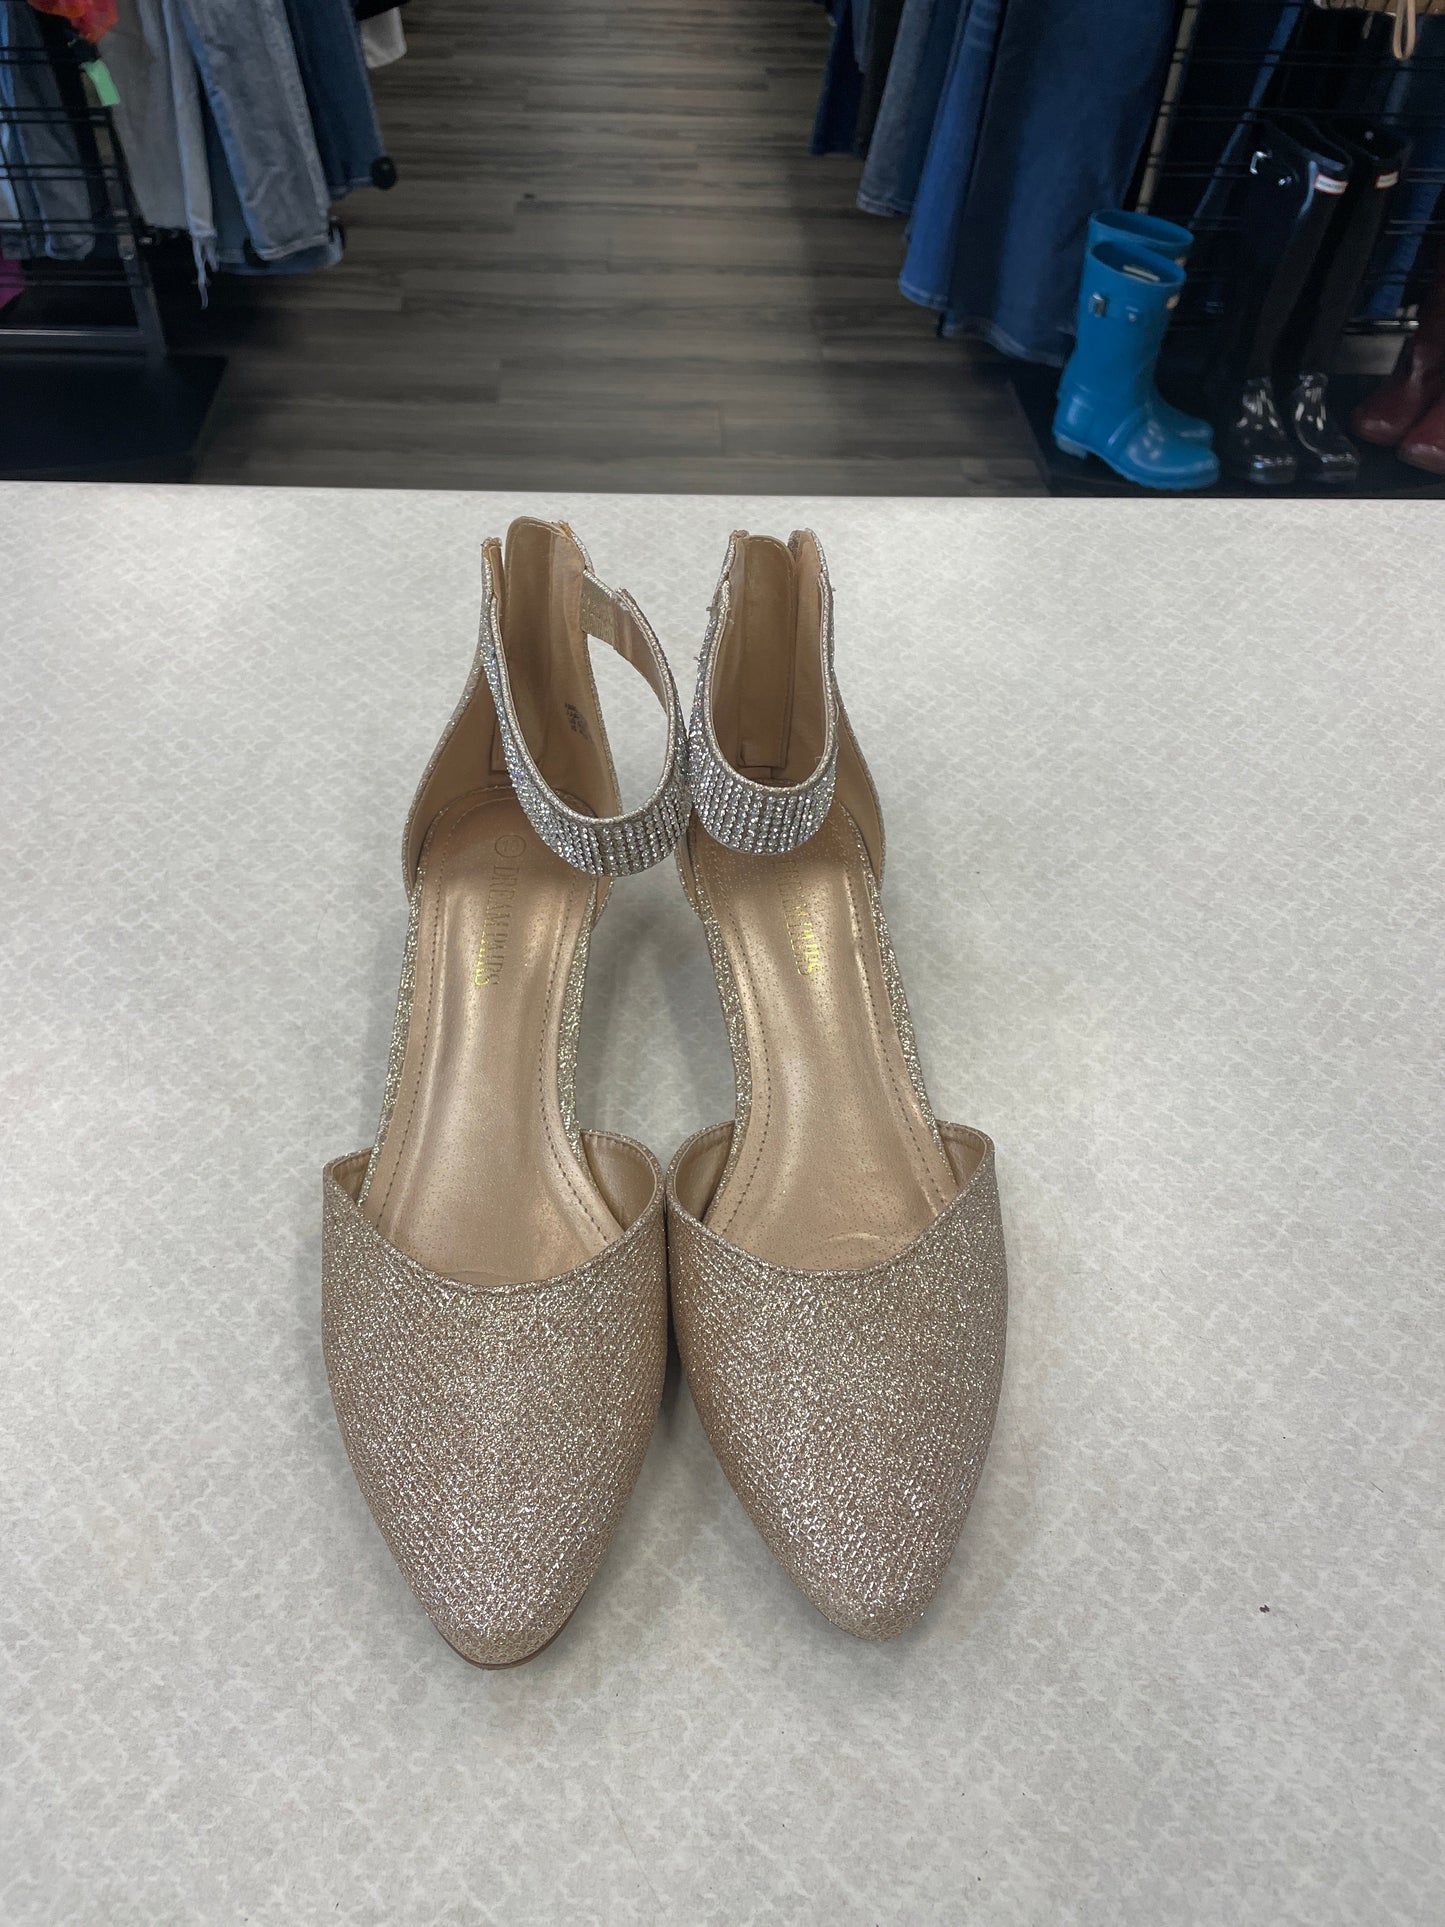 Gold Shoes Flats Clothes Mentor, Size 10